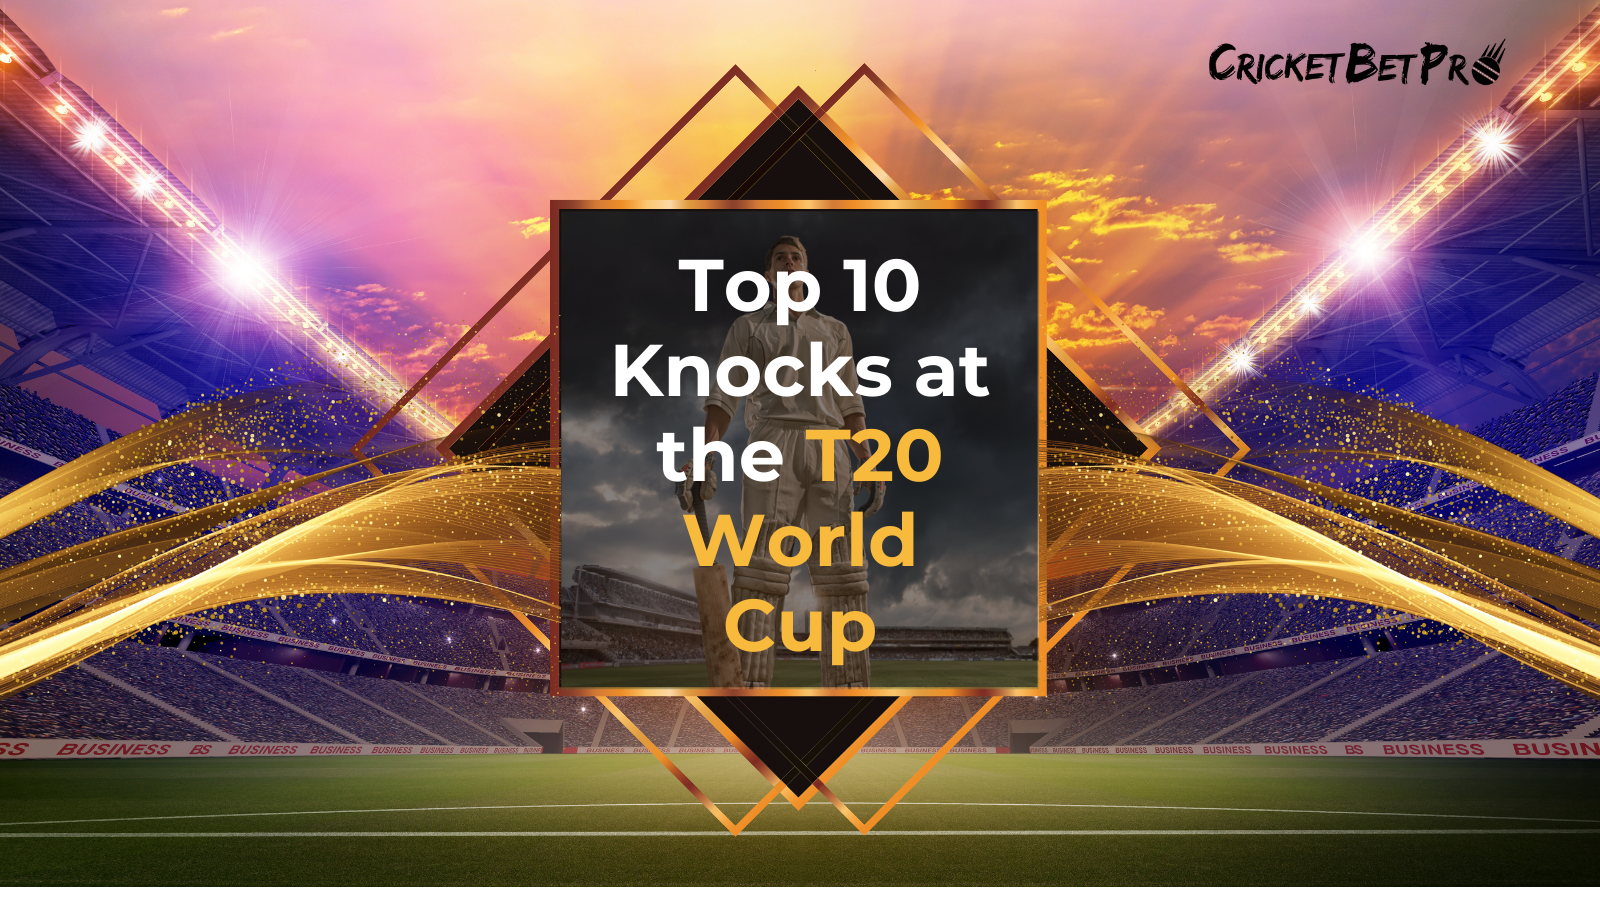 Top 10 Knocks at the T20 World Cup